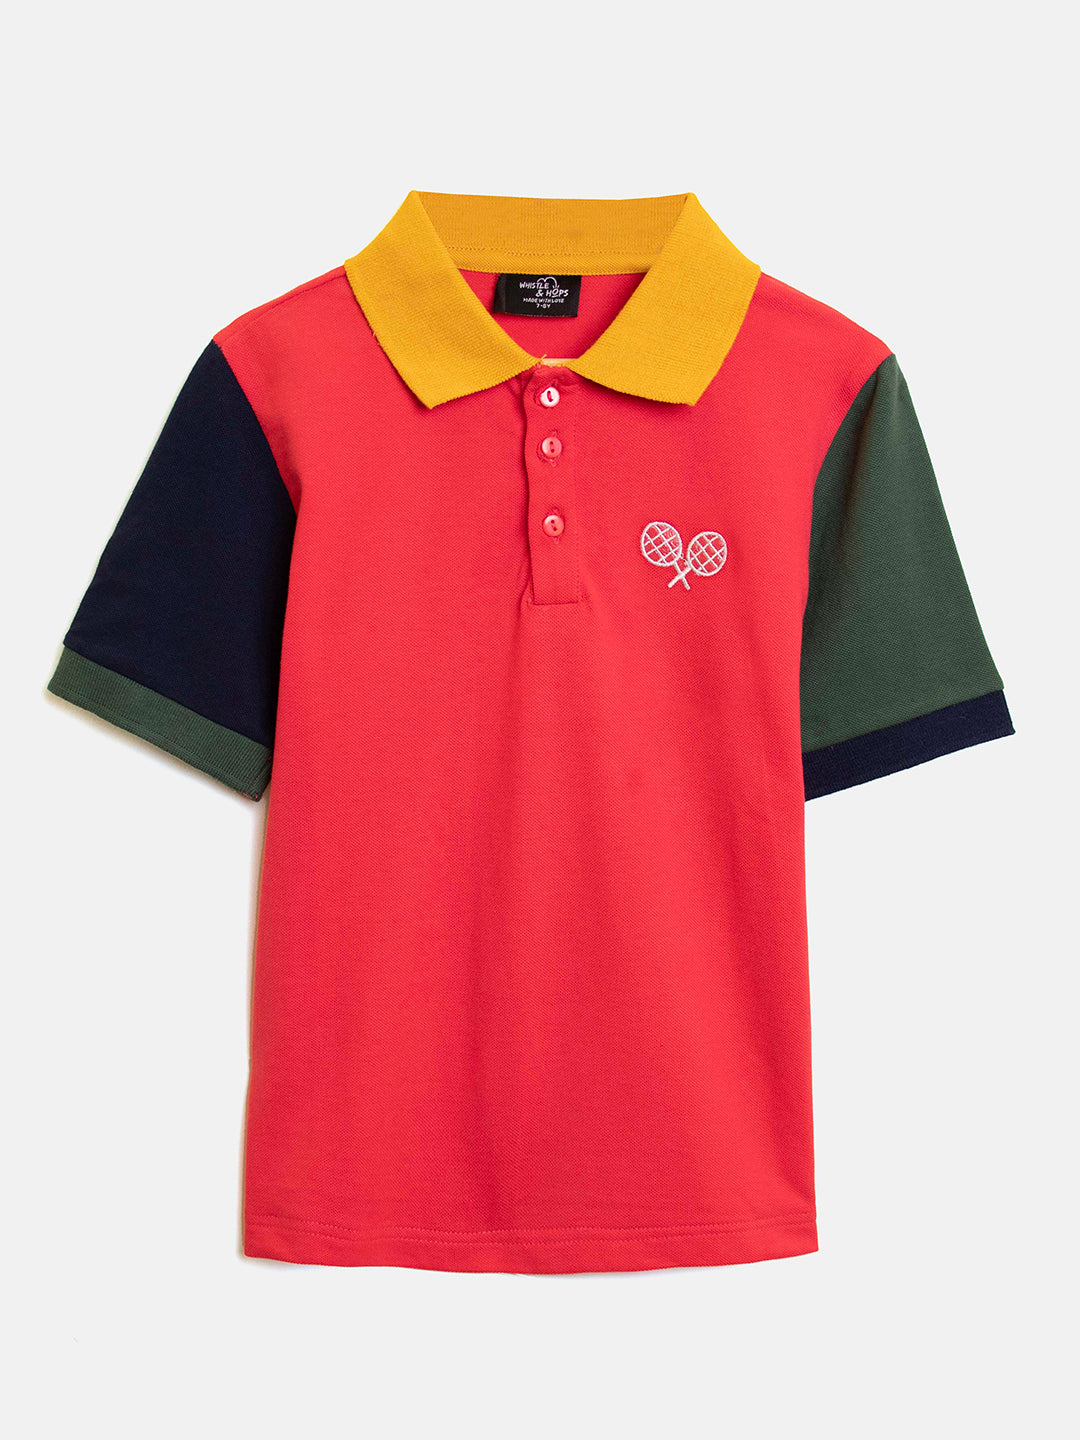 Badminton Embroidered Red Polo T-shirt